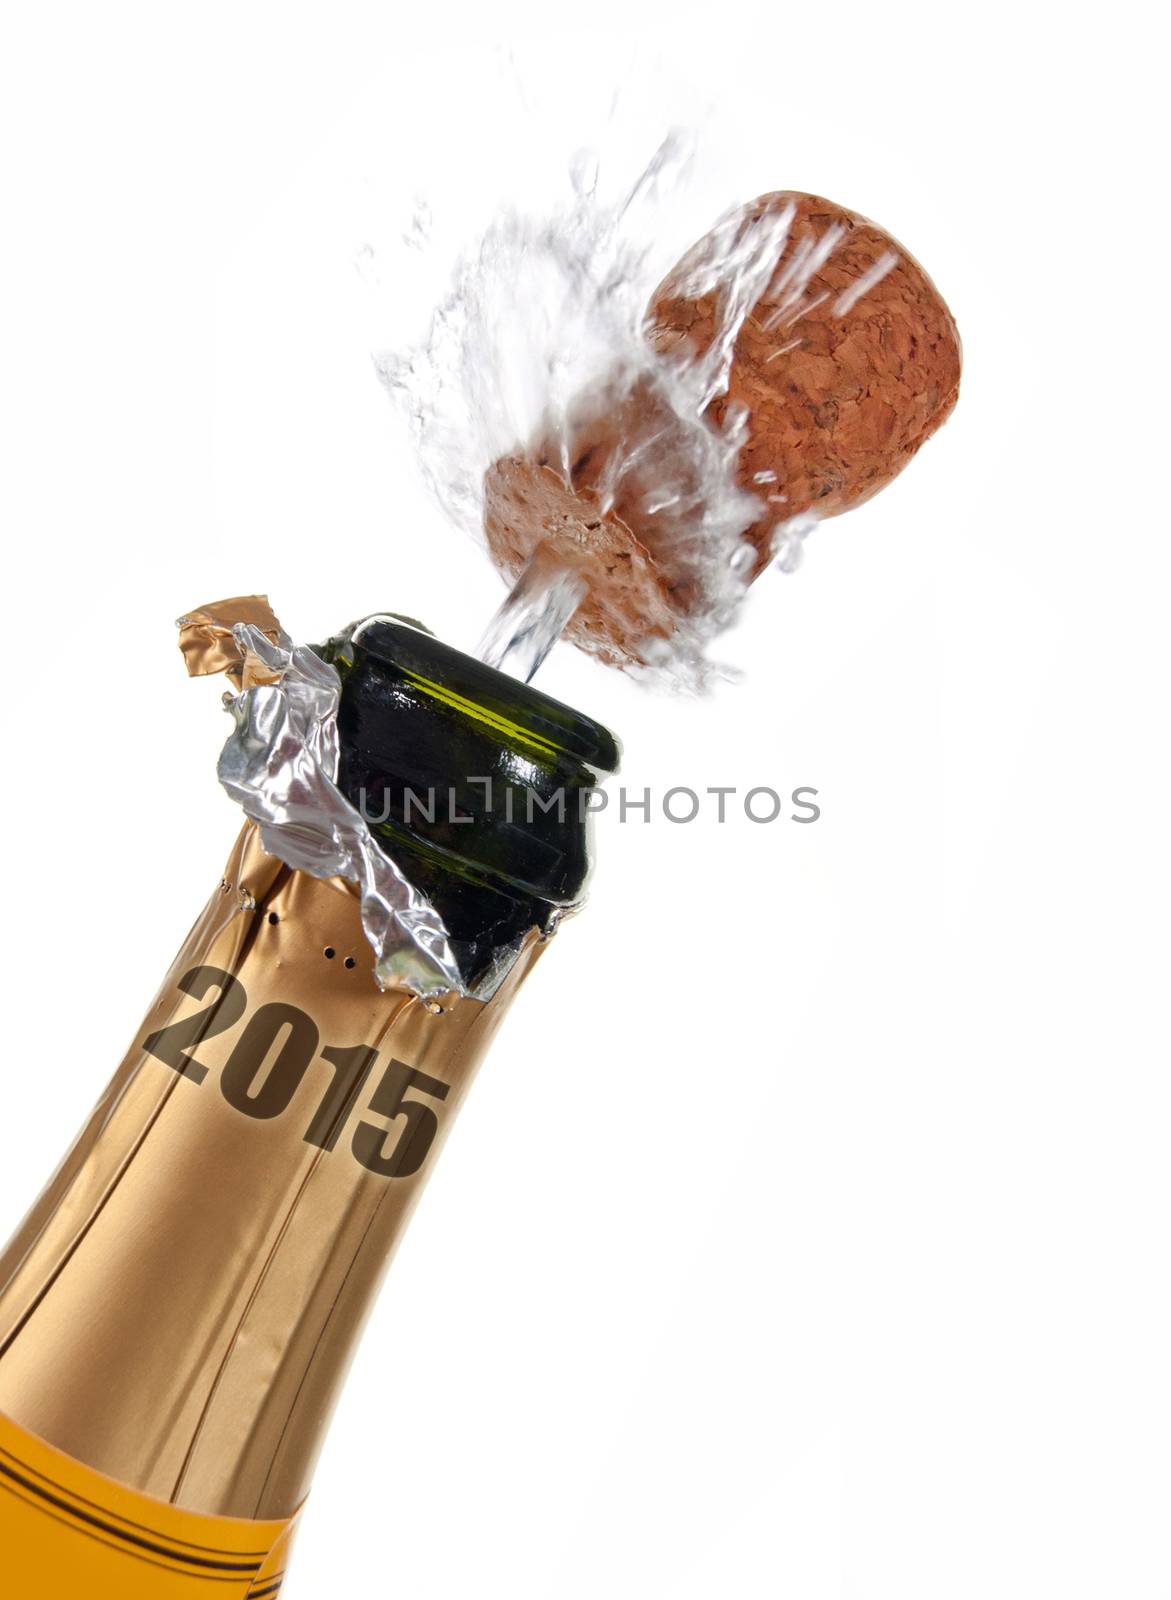 New year's eve champagne bottle 2015 by unikpix